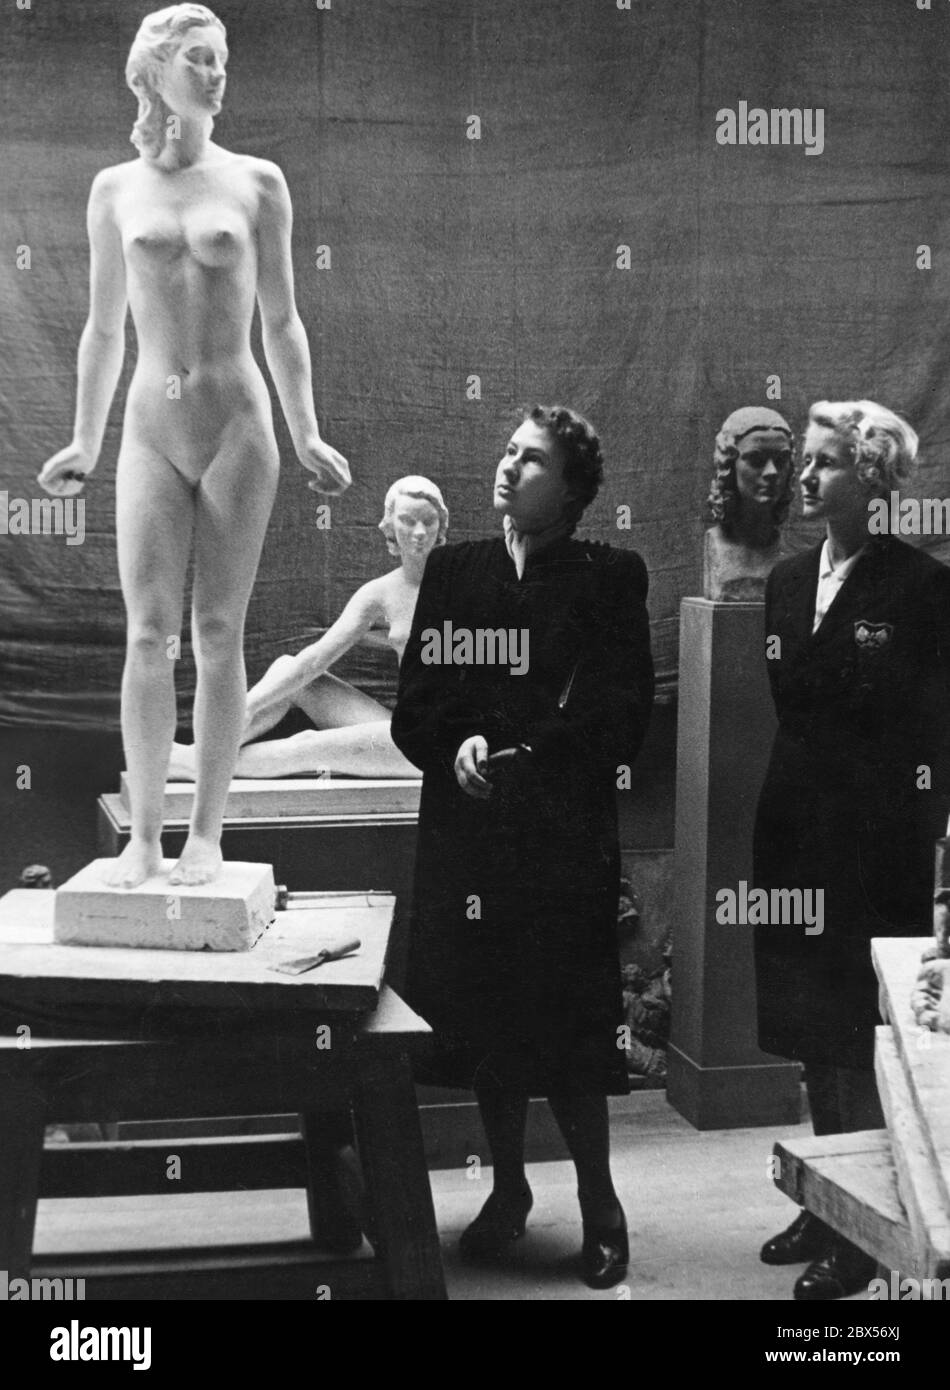 Visitors to an exhibition view the sculpture 'Die Jugend' (The Youth) by Fritz Klimsch. Stock Photo